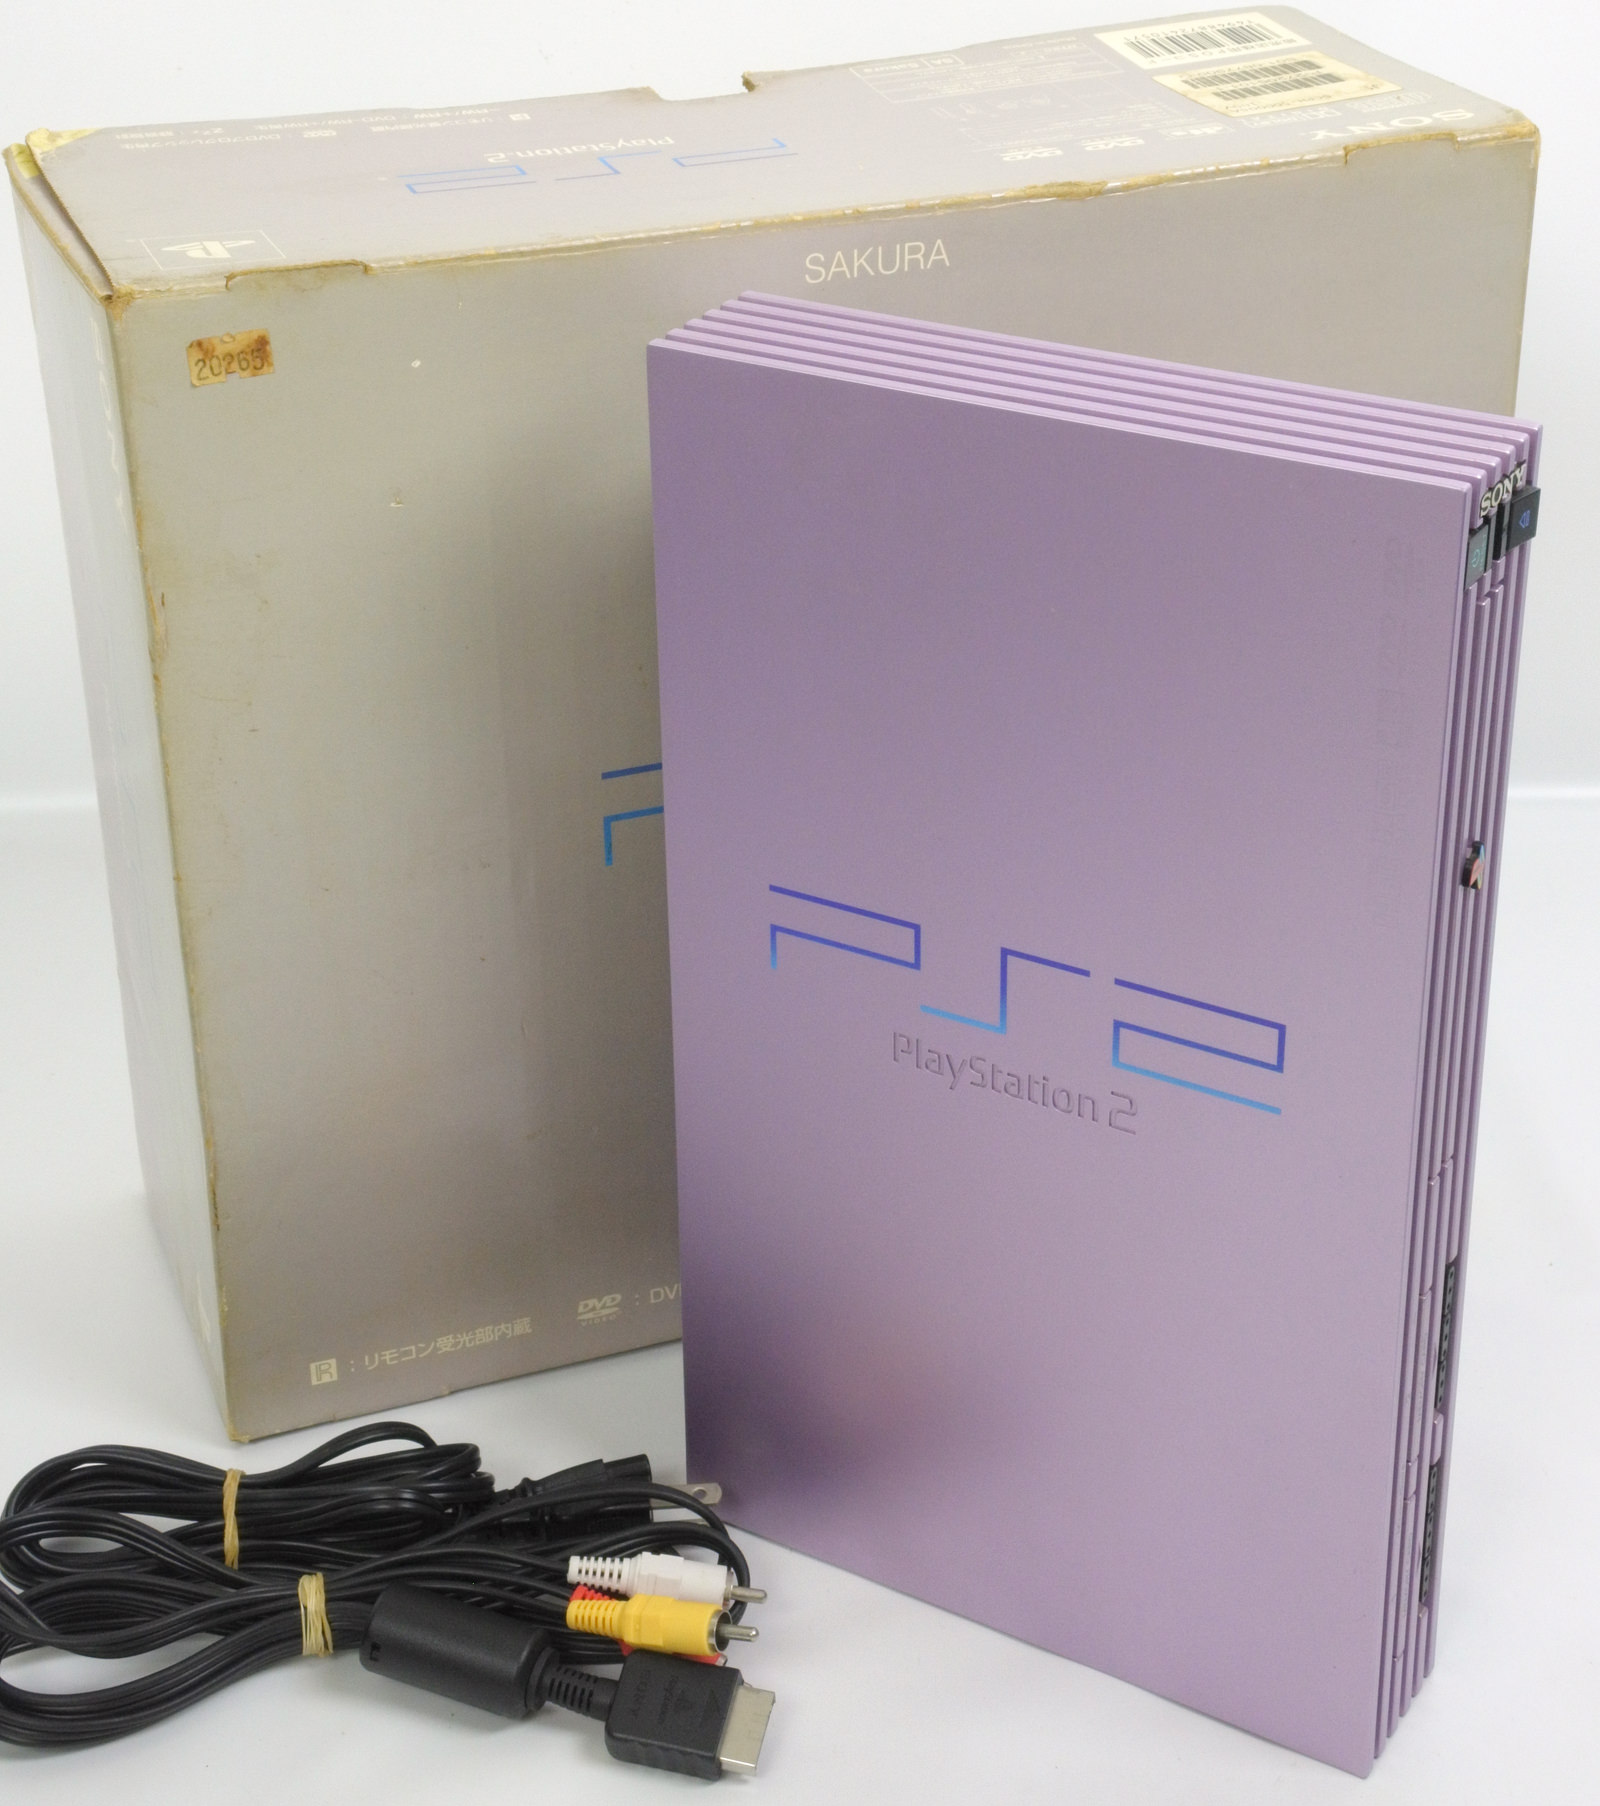 PS2 SAKURA PINK Console System Boxed SCPH-50000 9984 Tested Playstation